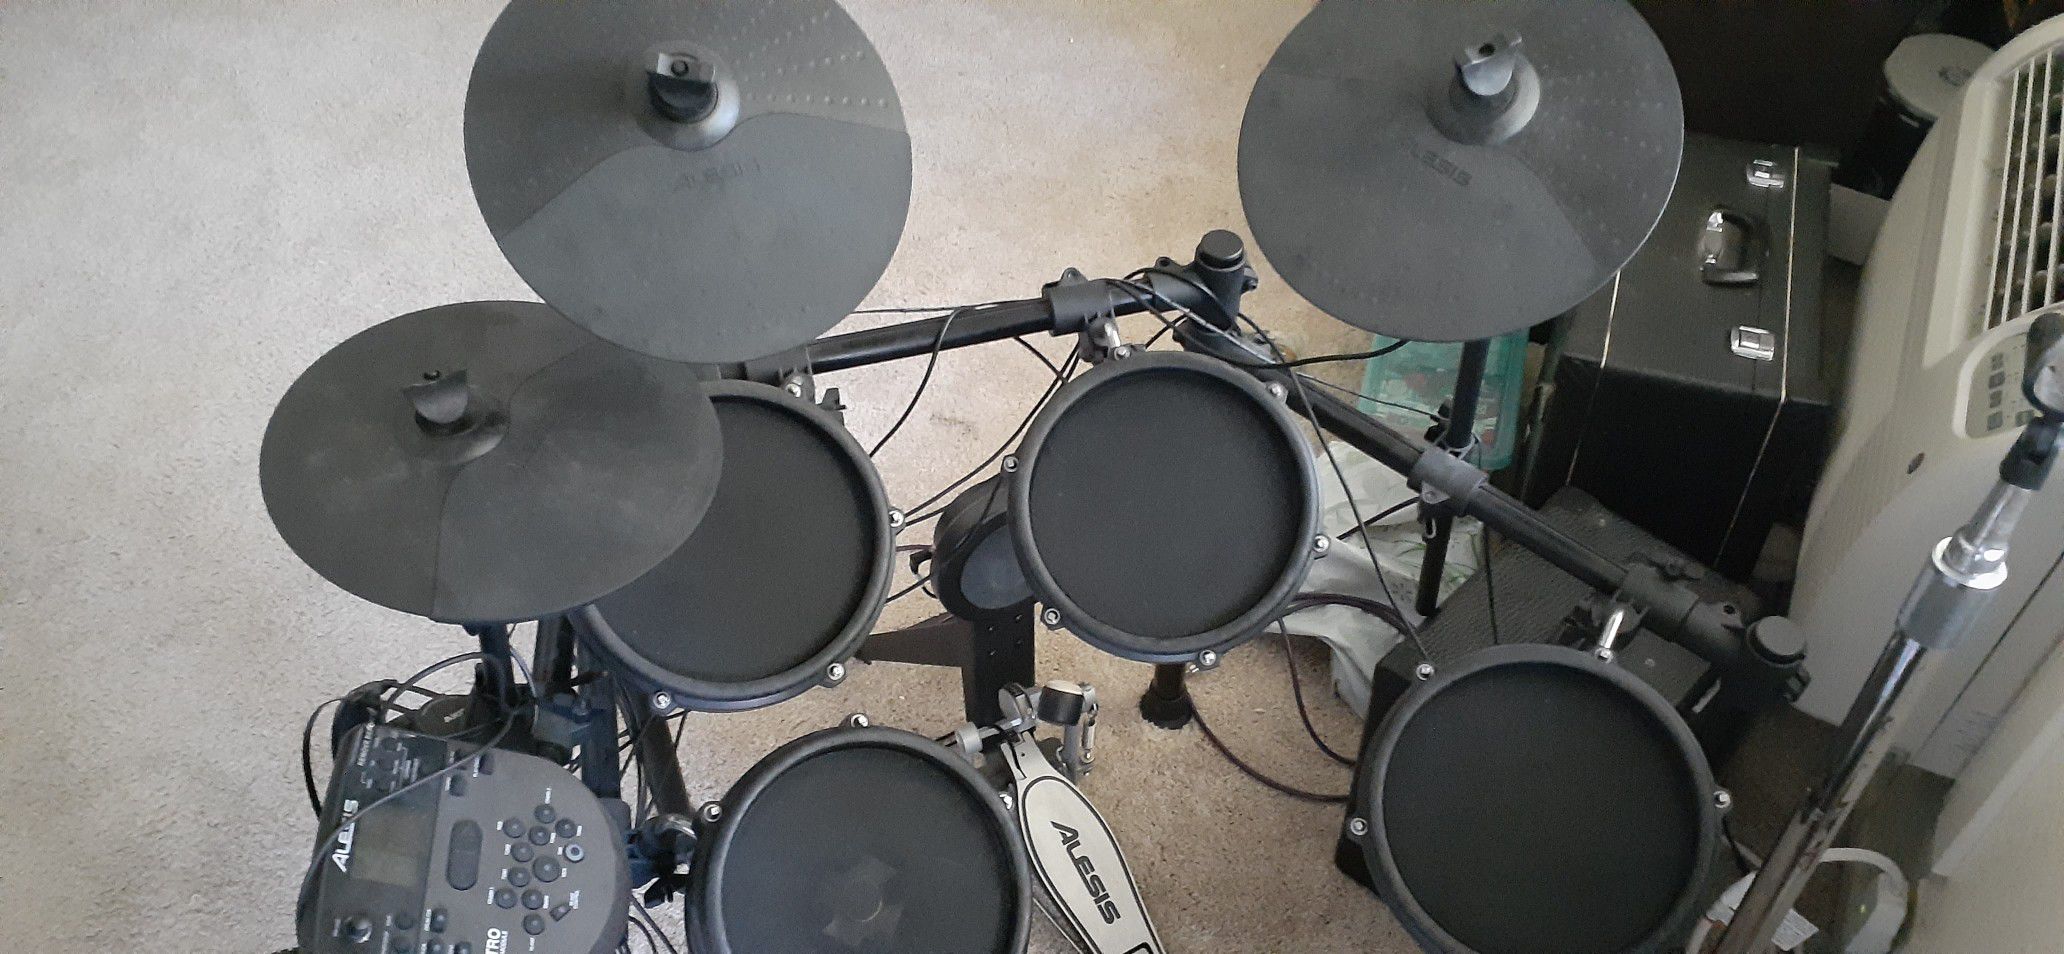 Electronic Drum set for sale. Special for not making noise.